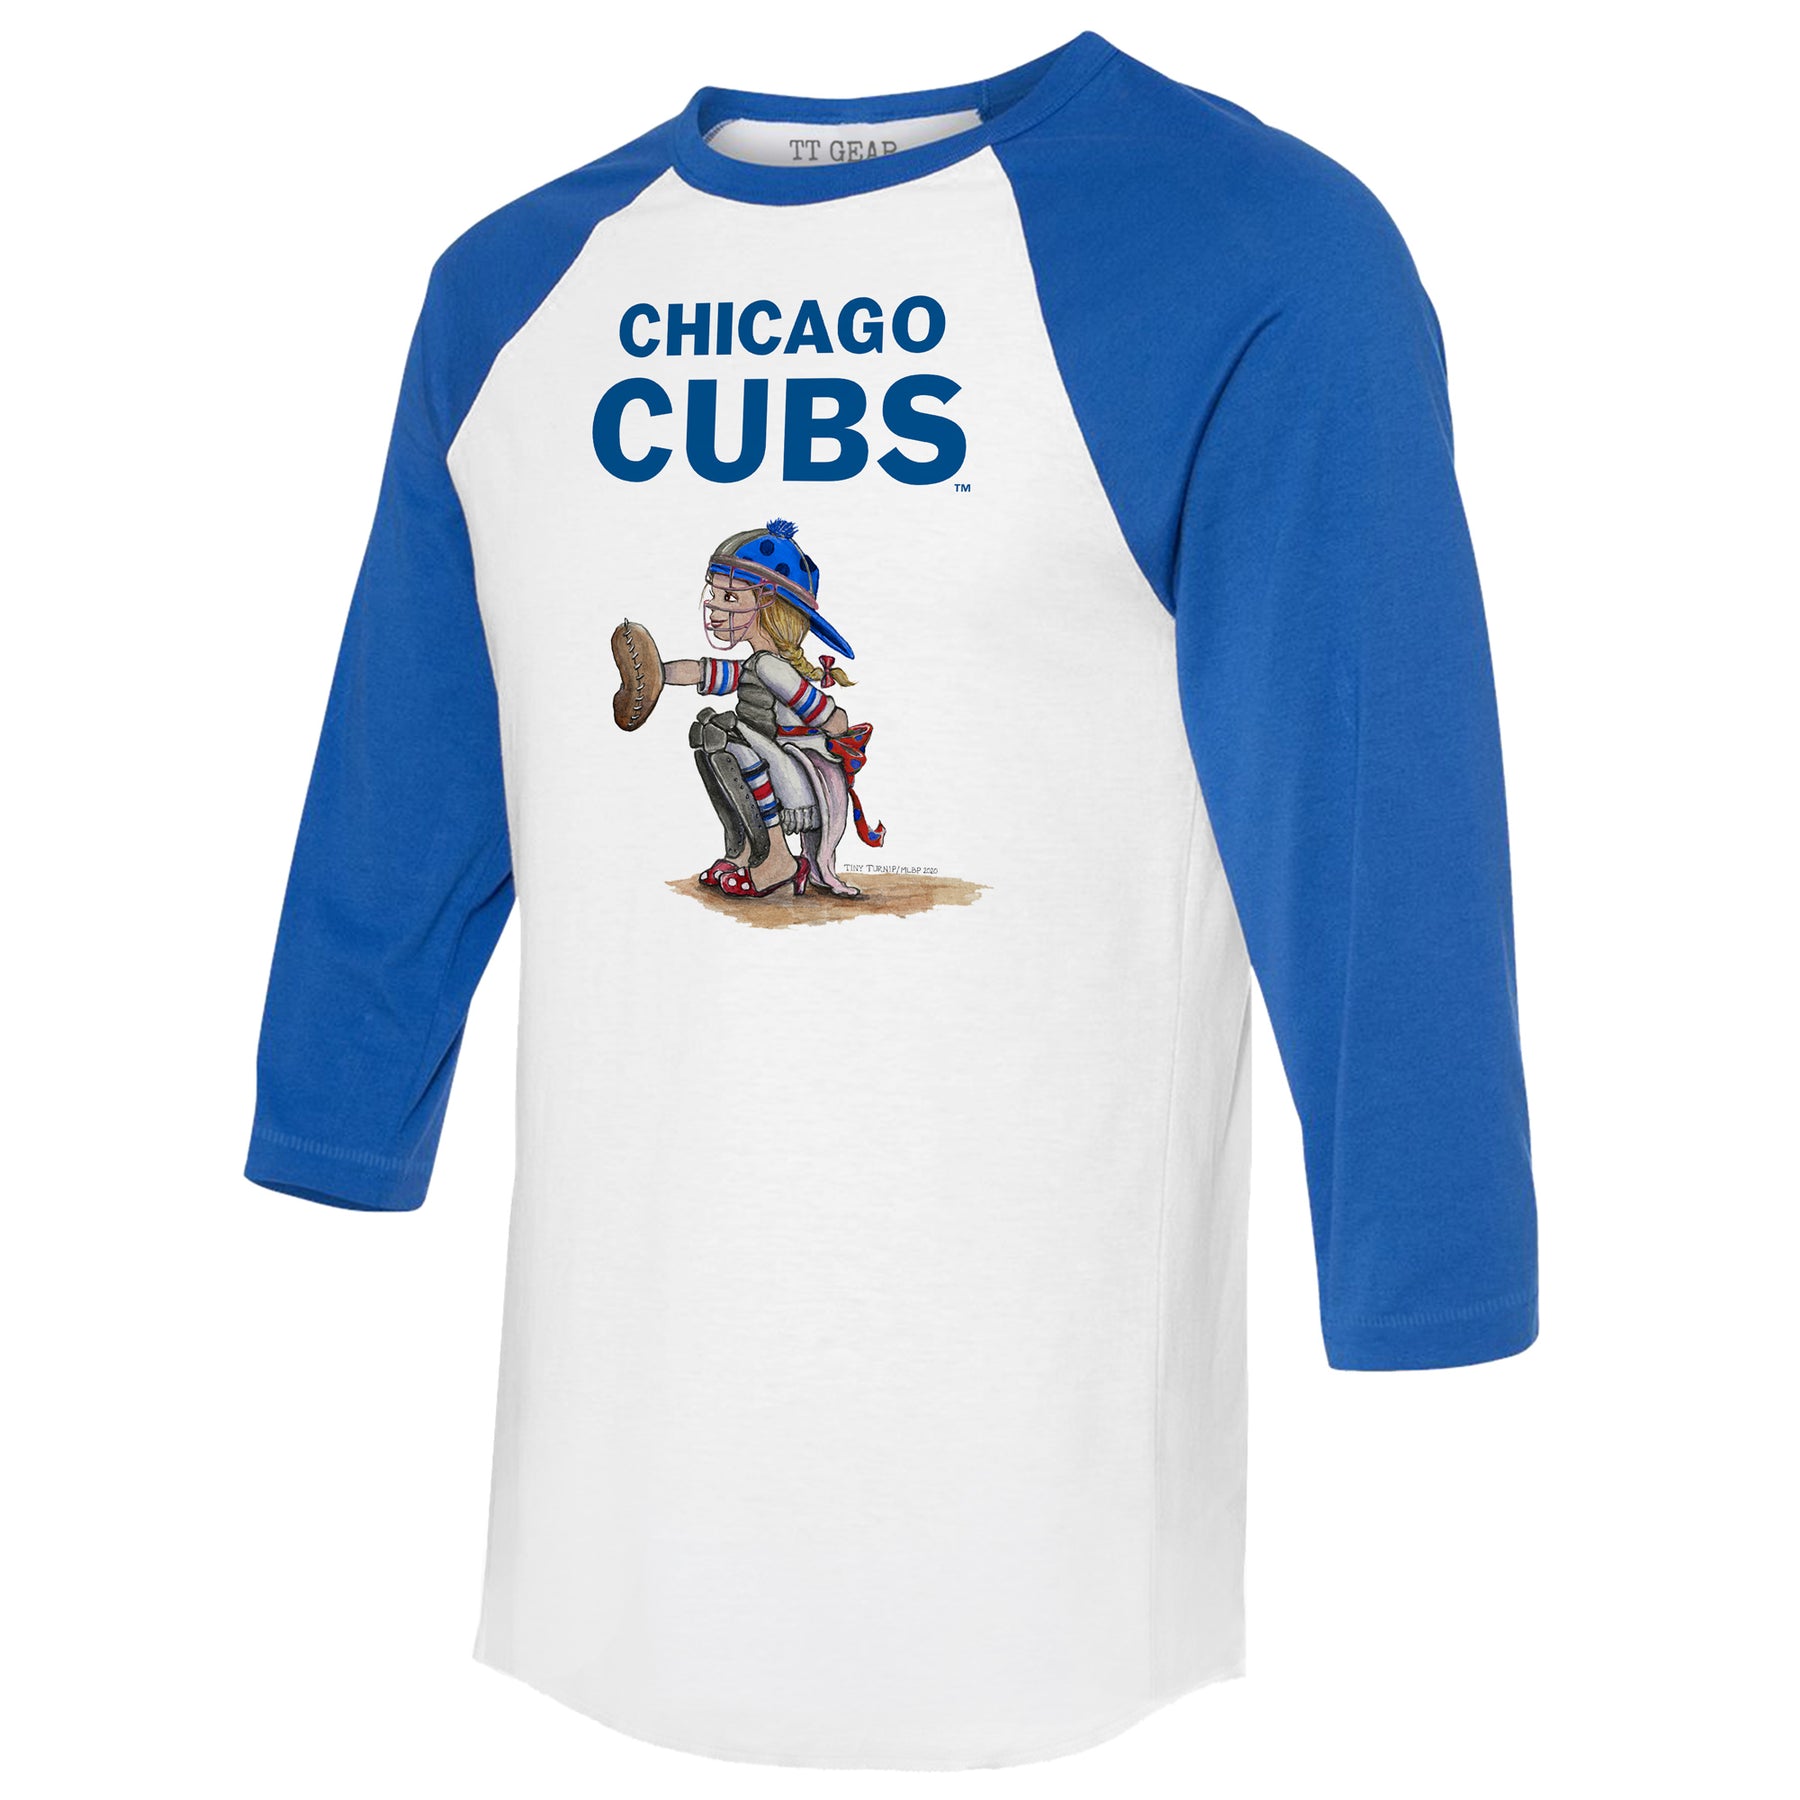 Chicago Cubs Kate the Catcher 3/4 Royal Blue Sleeve Raglan